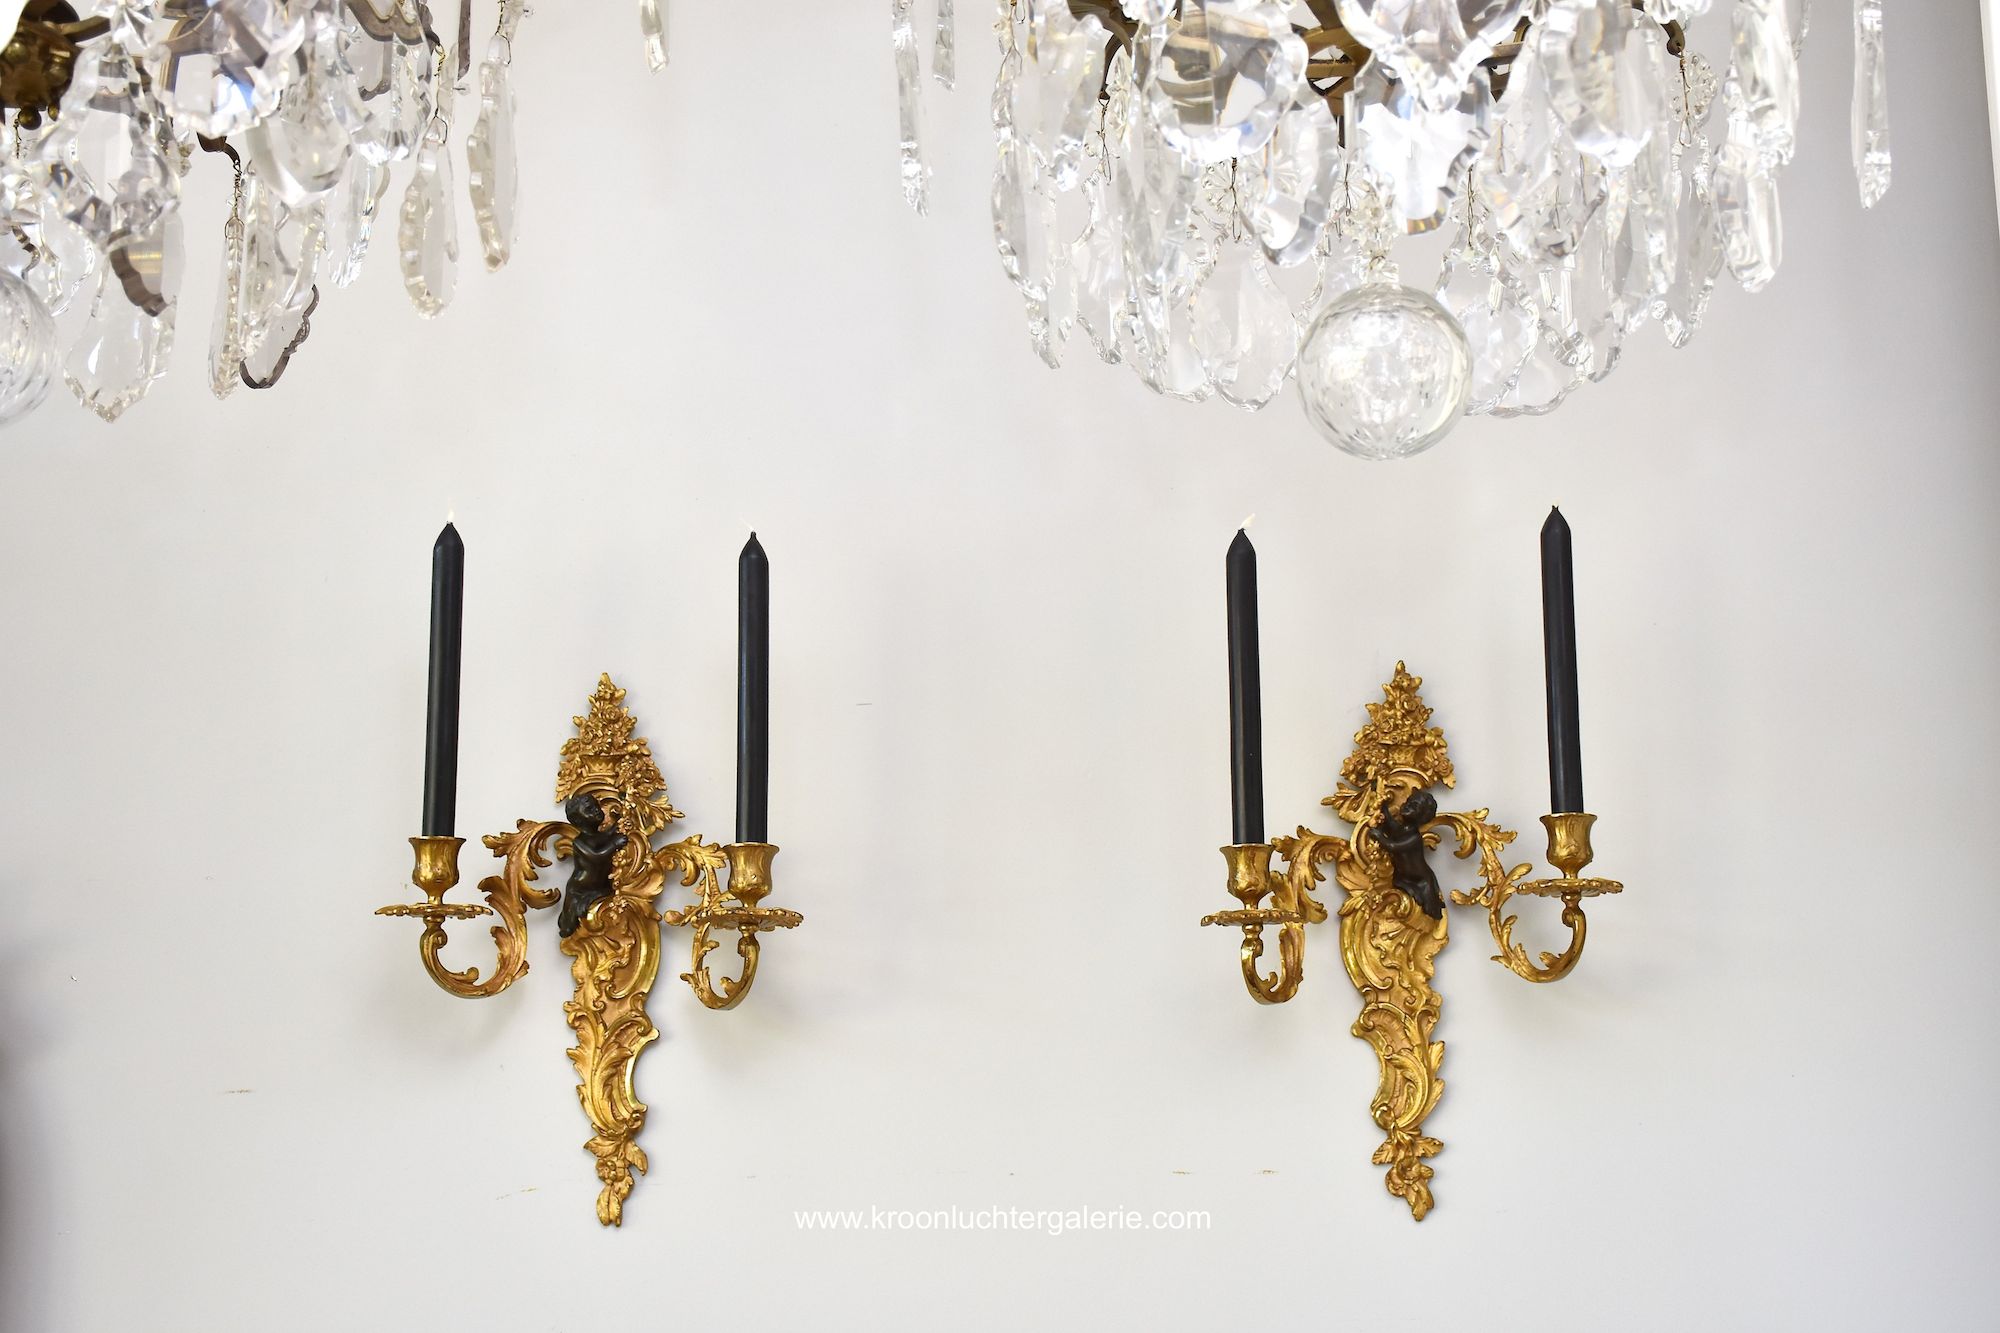 A pair of 19th century French wall lights